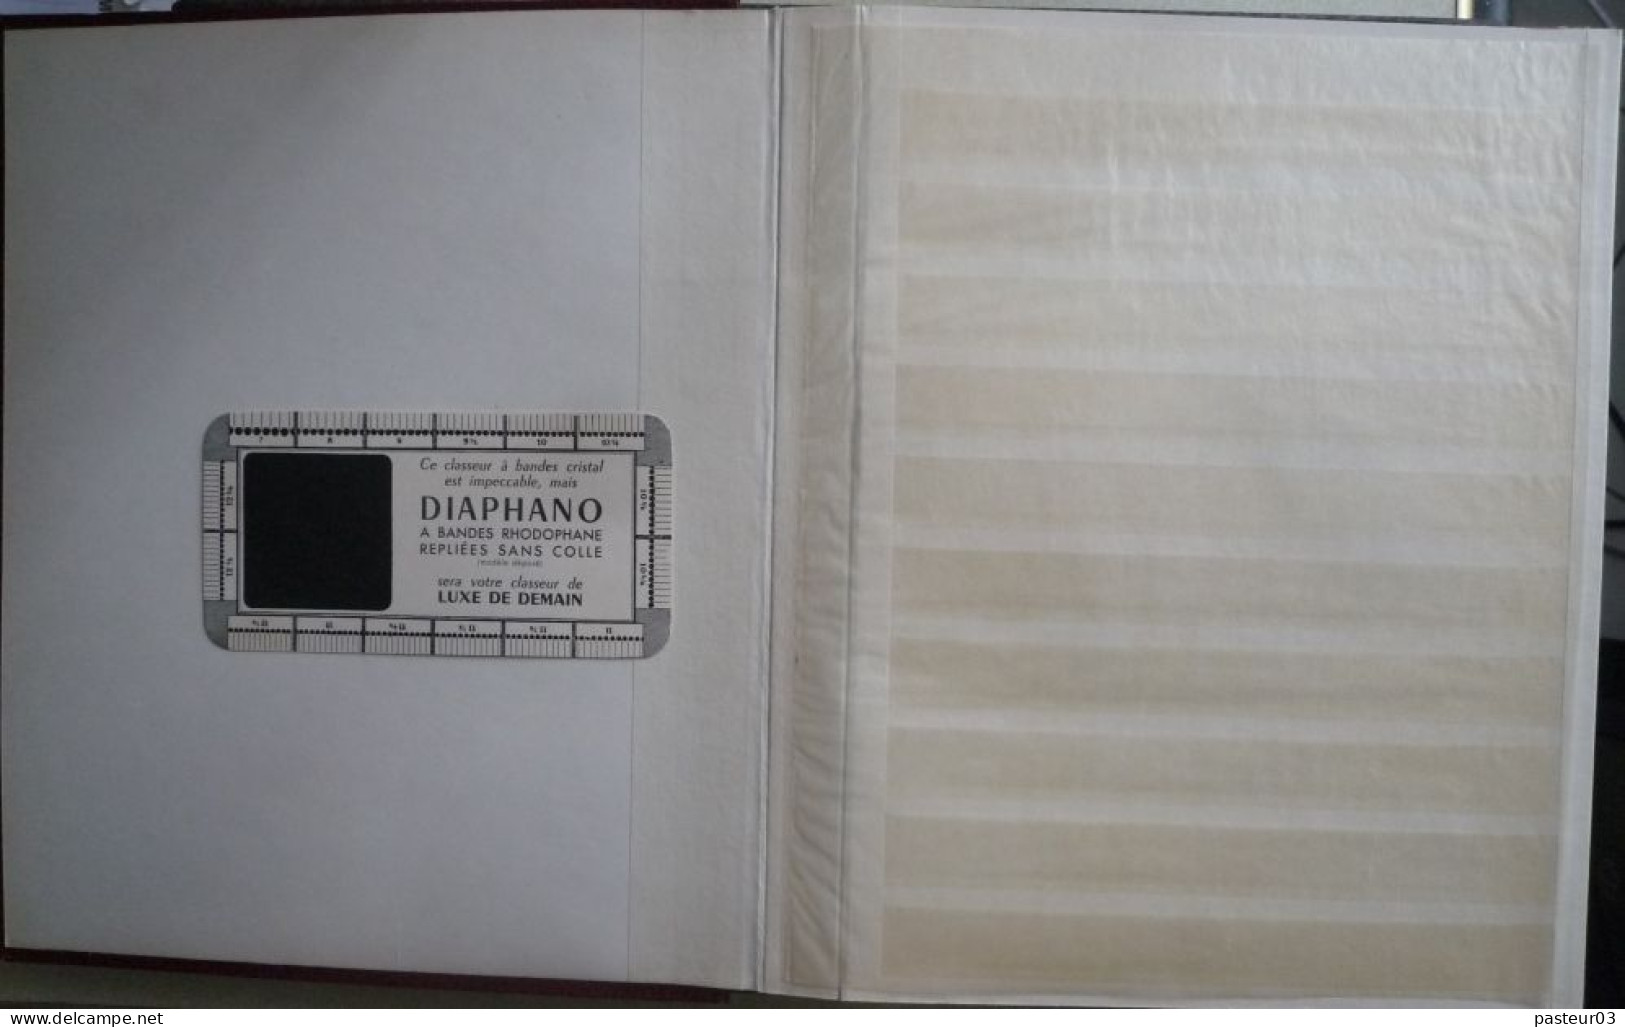 Classeur Marque DIAPHANO 12 Pages Blanches 10 Bandes Avec Odontomètre - Small Format, White Pages